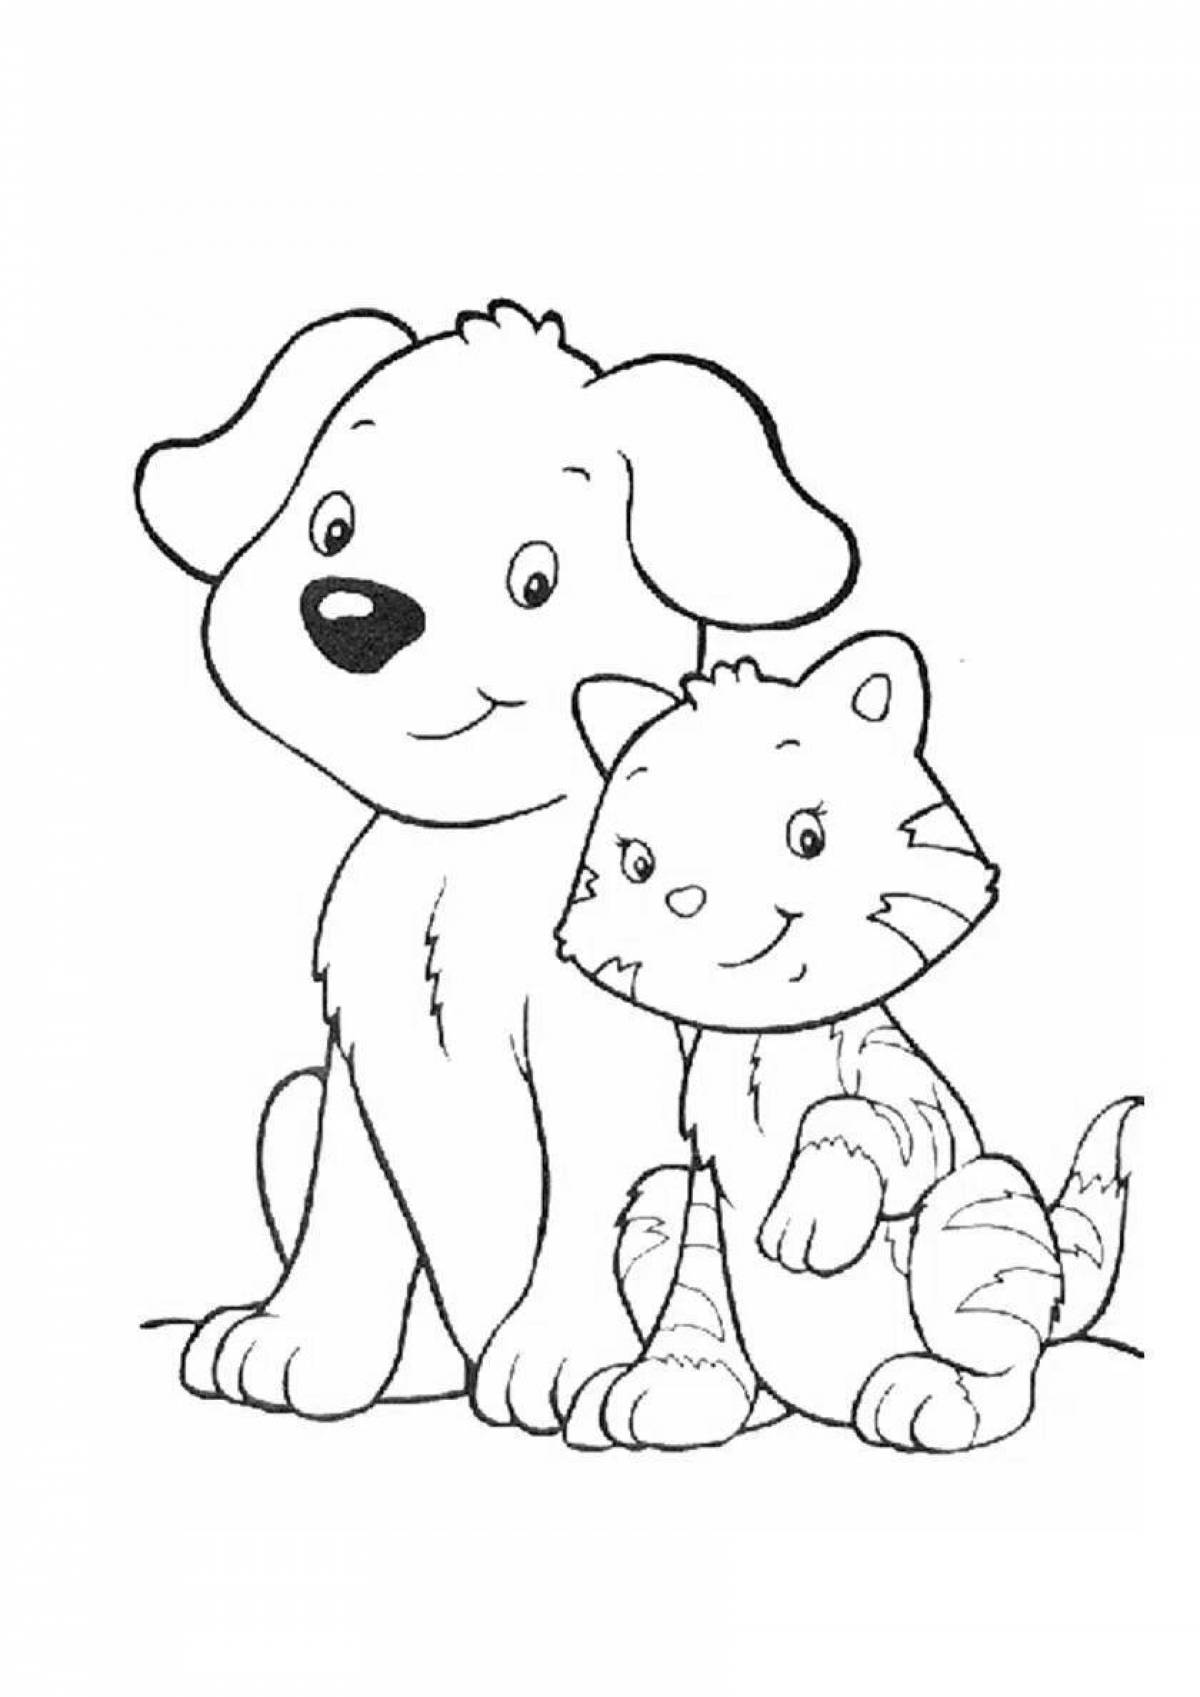 Great coloring book kittens dogs for children 3 4 years old